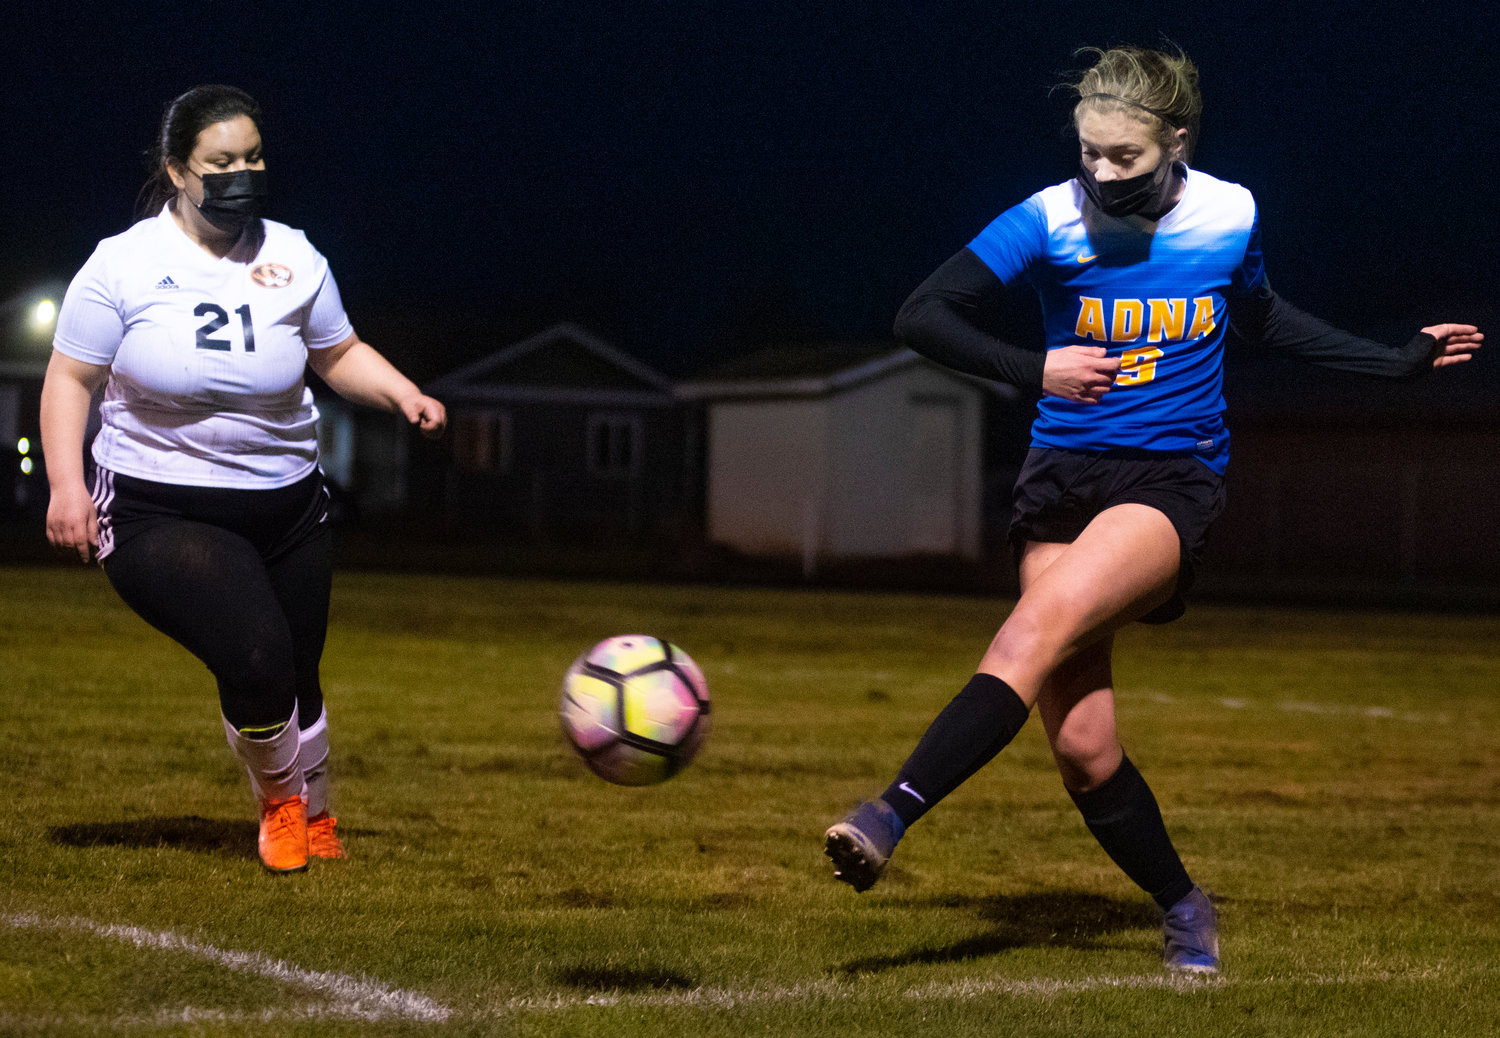 Adna's Kaylin Todd (9) boots the ball away from Napavine's Liliana Marcial (21) during a match on Wednesday.